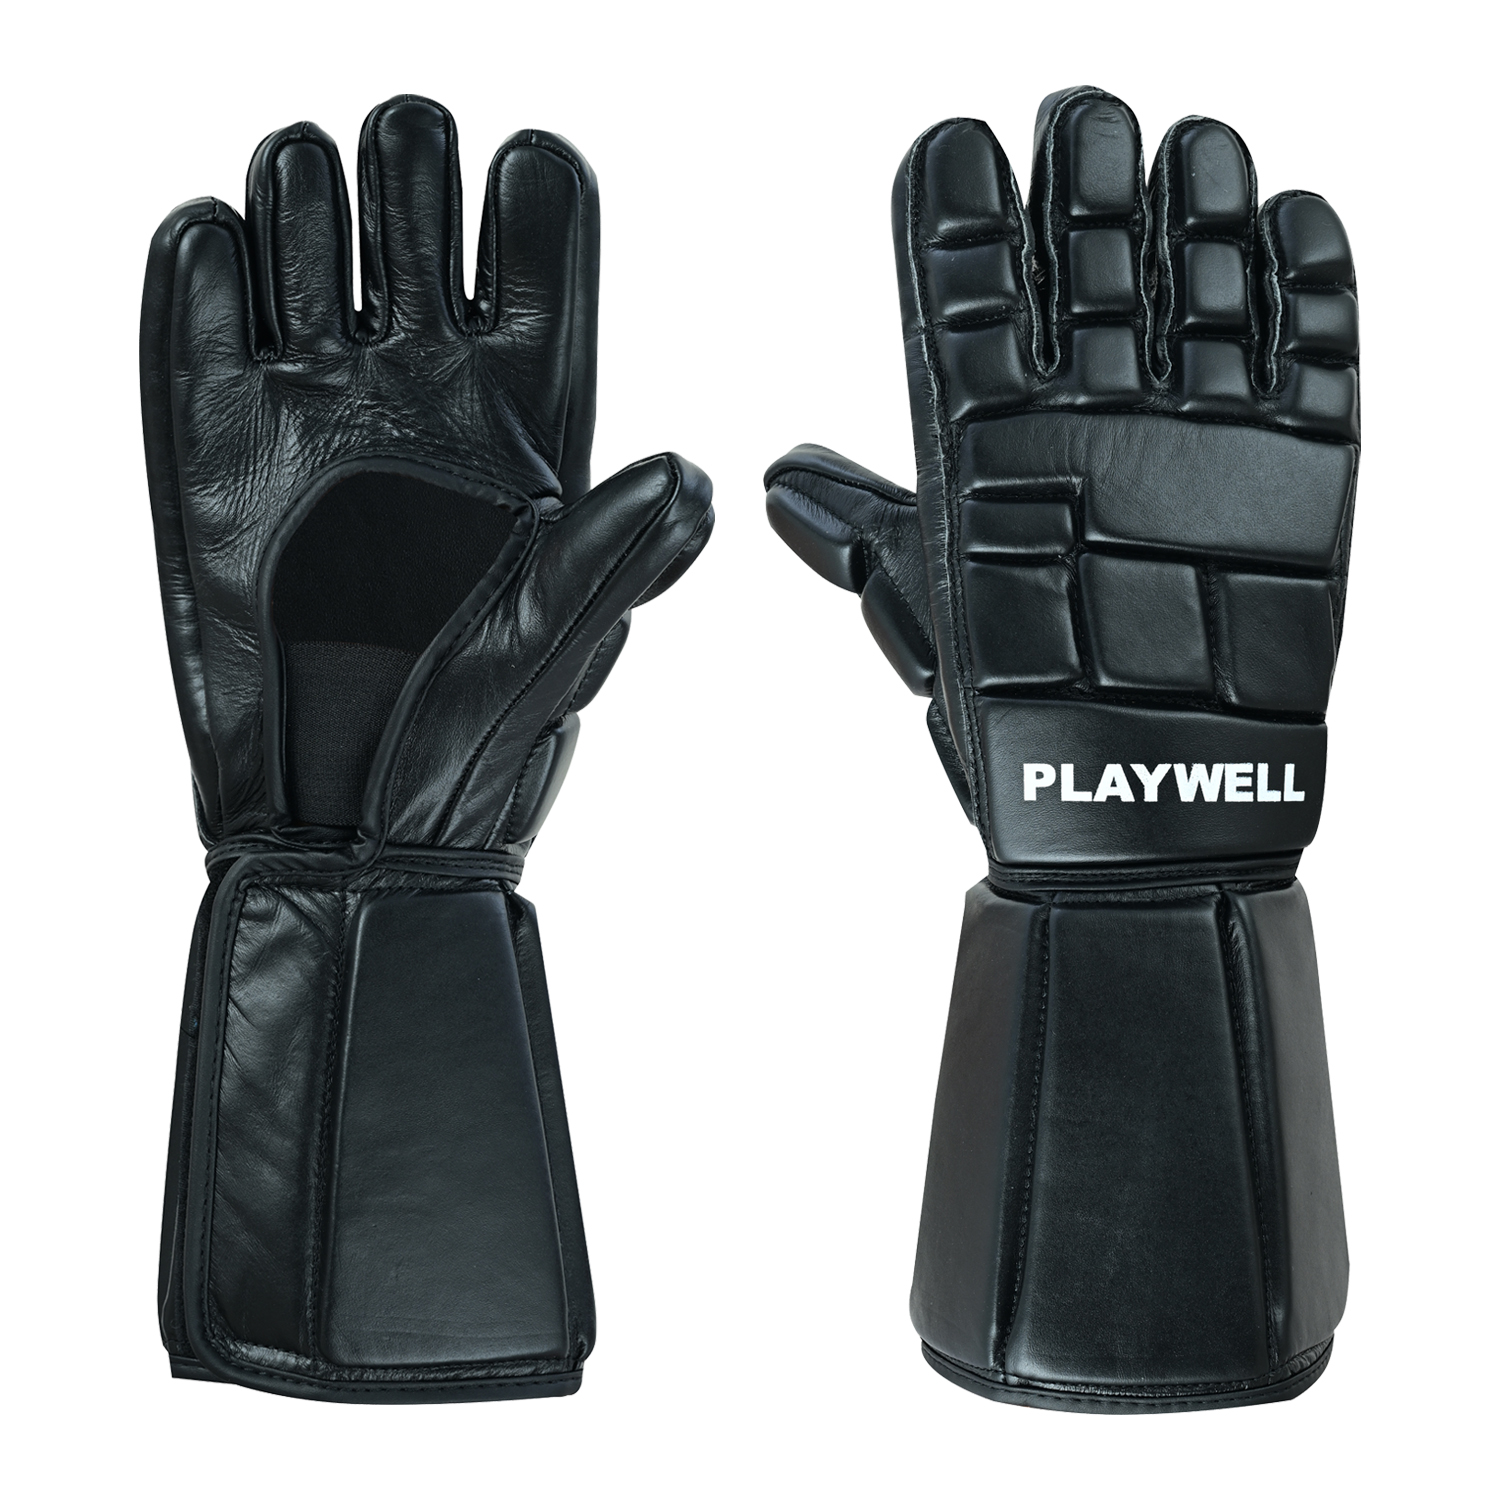 Full Contact leather Ultimate Escrima Gloves - NEW - Click Image to Close